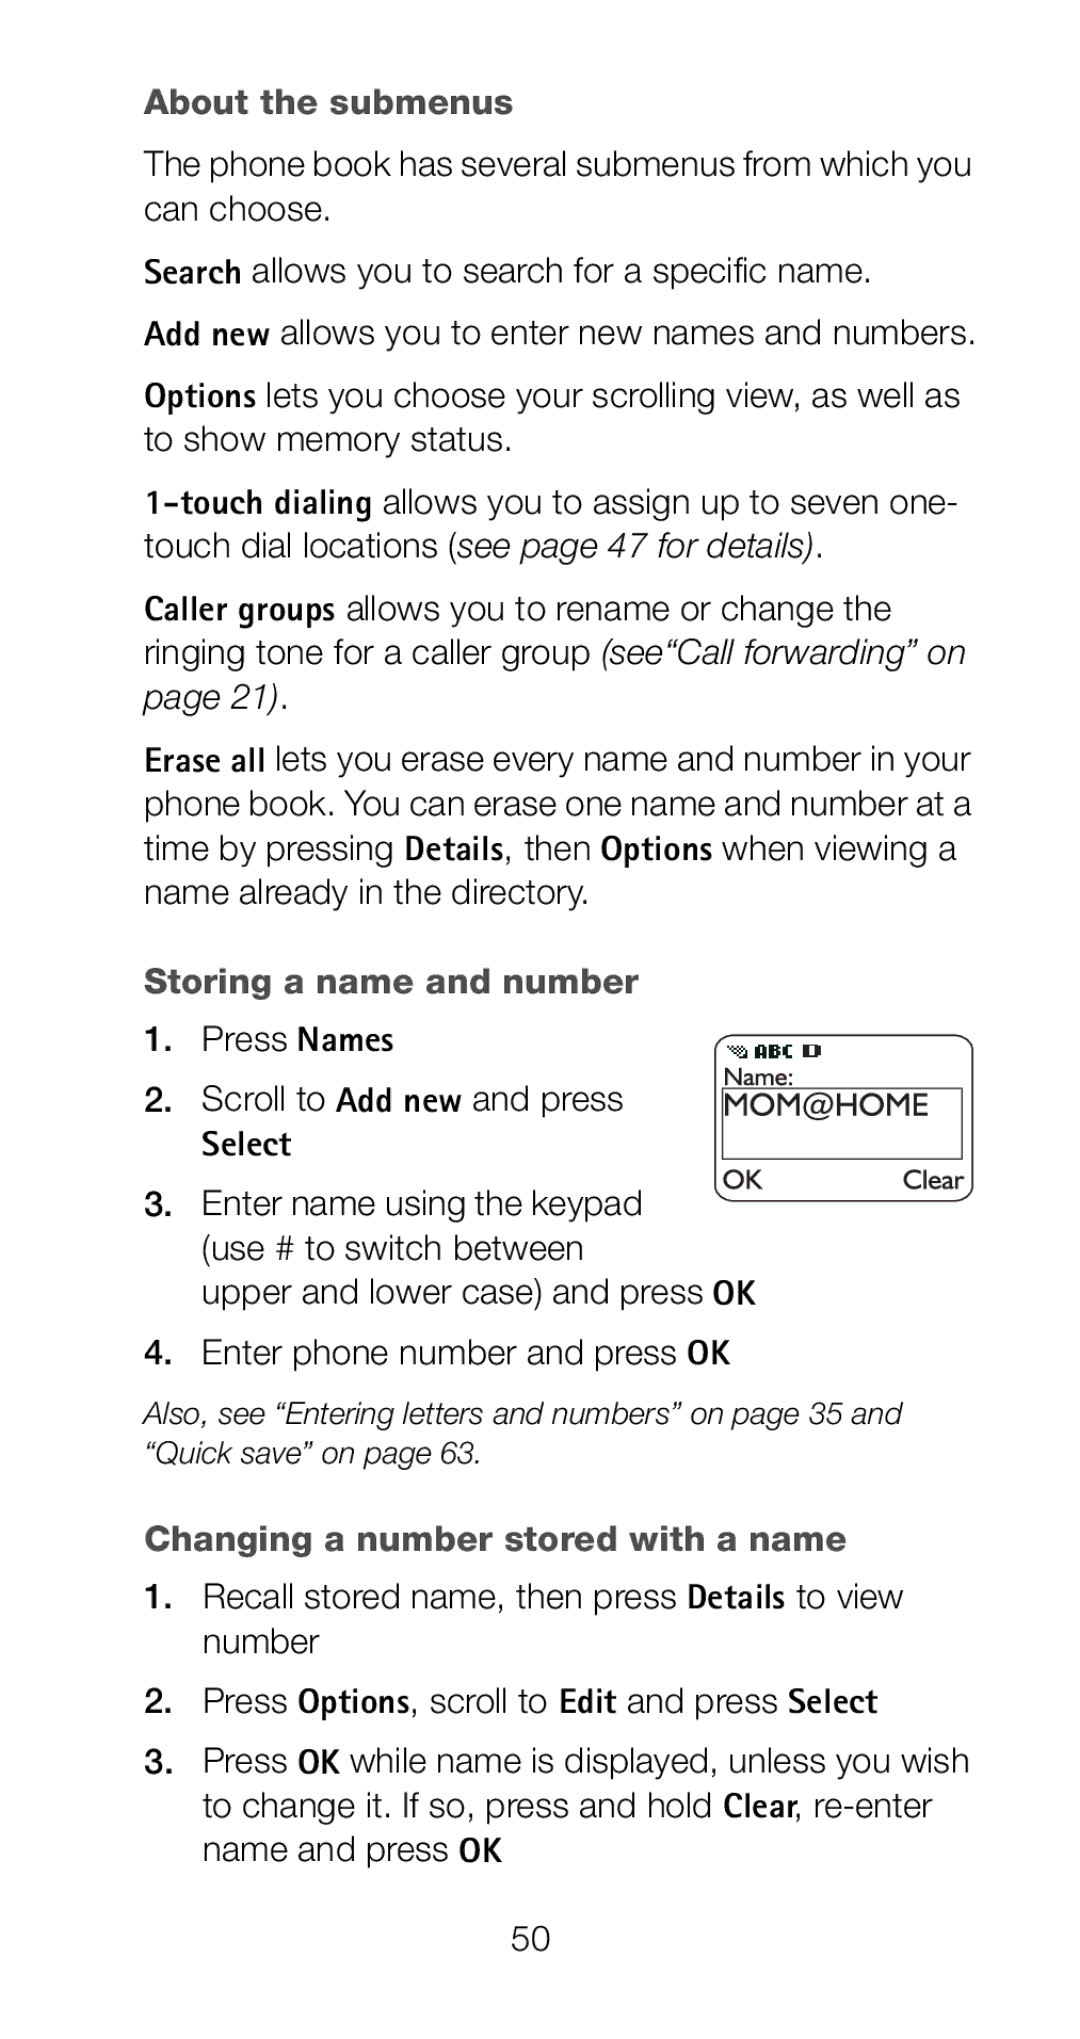 Nokia 6161i owner manual About the submenus, Storing a name and number, Press Names Scroll to Add new and press 